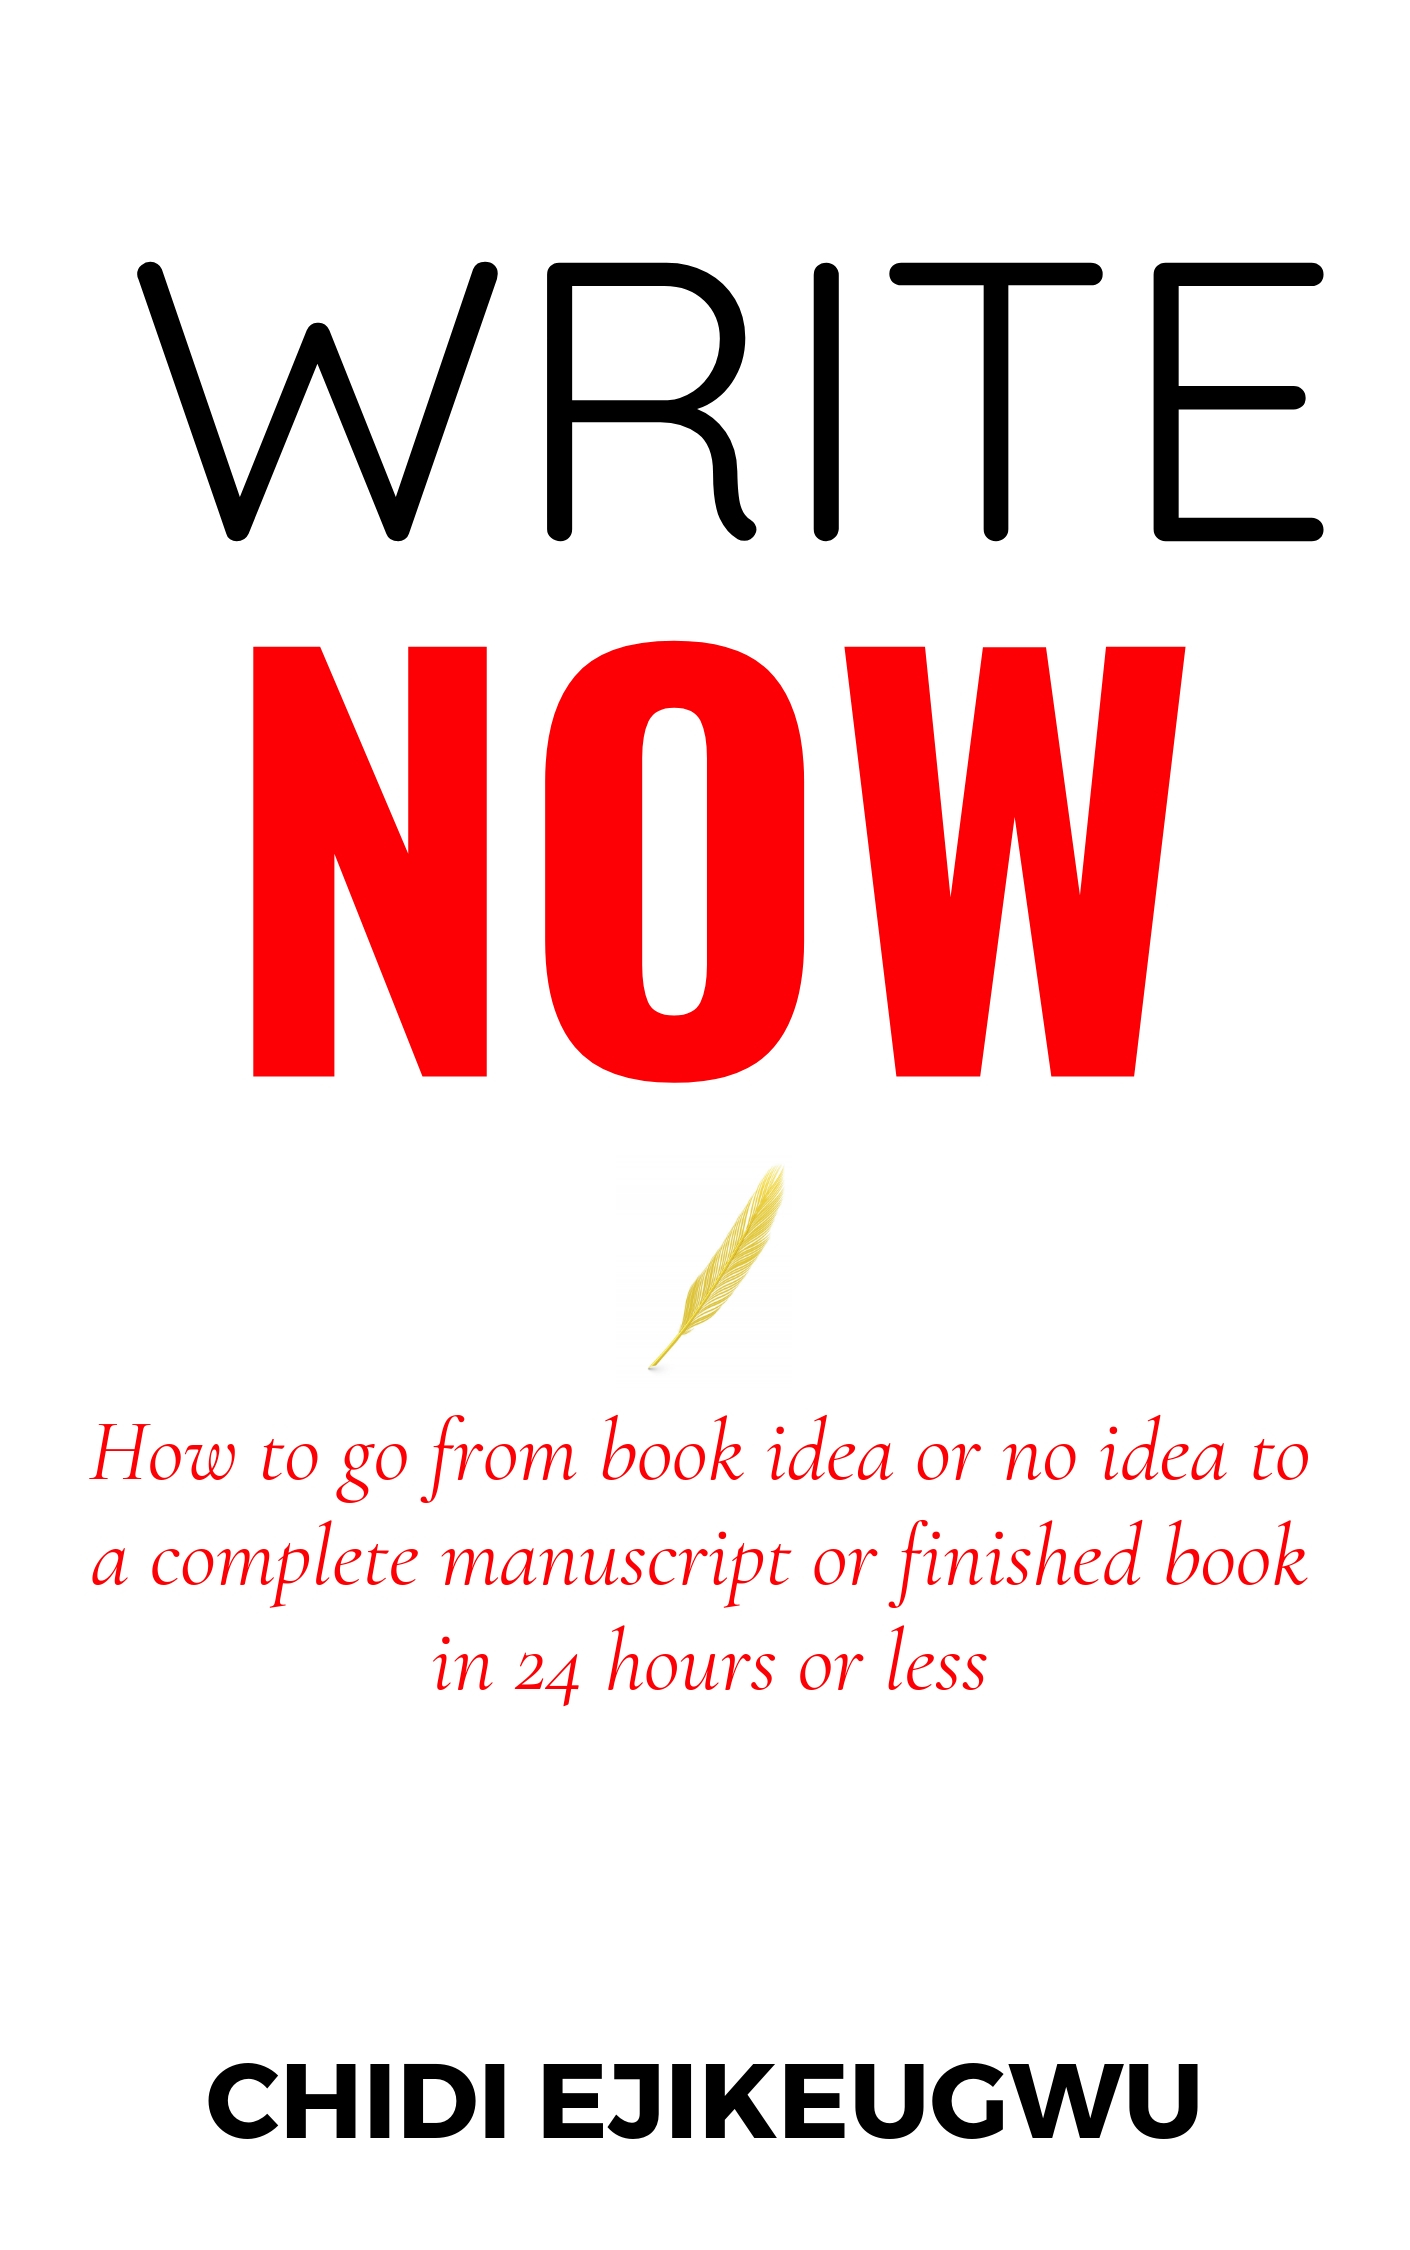 FREE: Write Now: How to go From Book Idea or no Idea to Complete Manuscript or Finished Book in 24 Hours or Less by Chidi Ejikeugwu